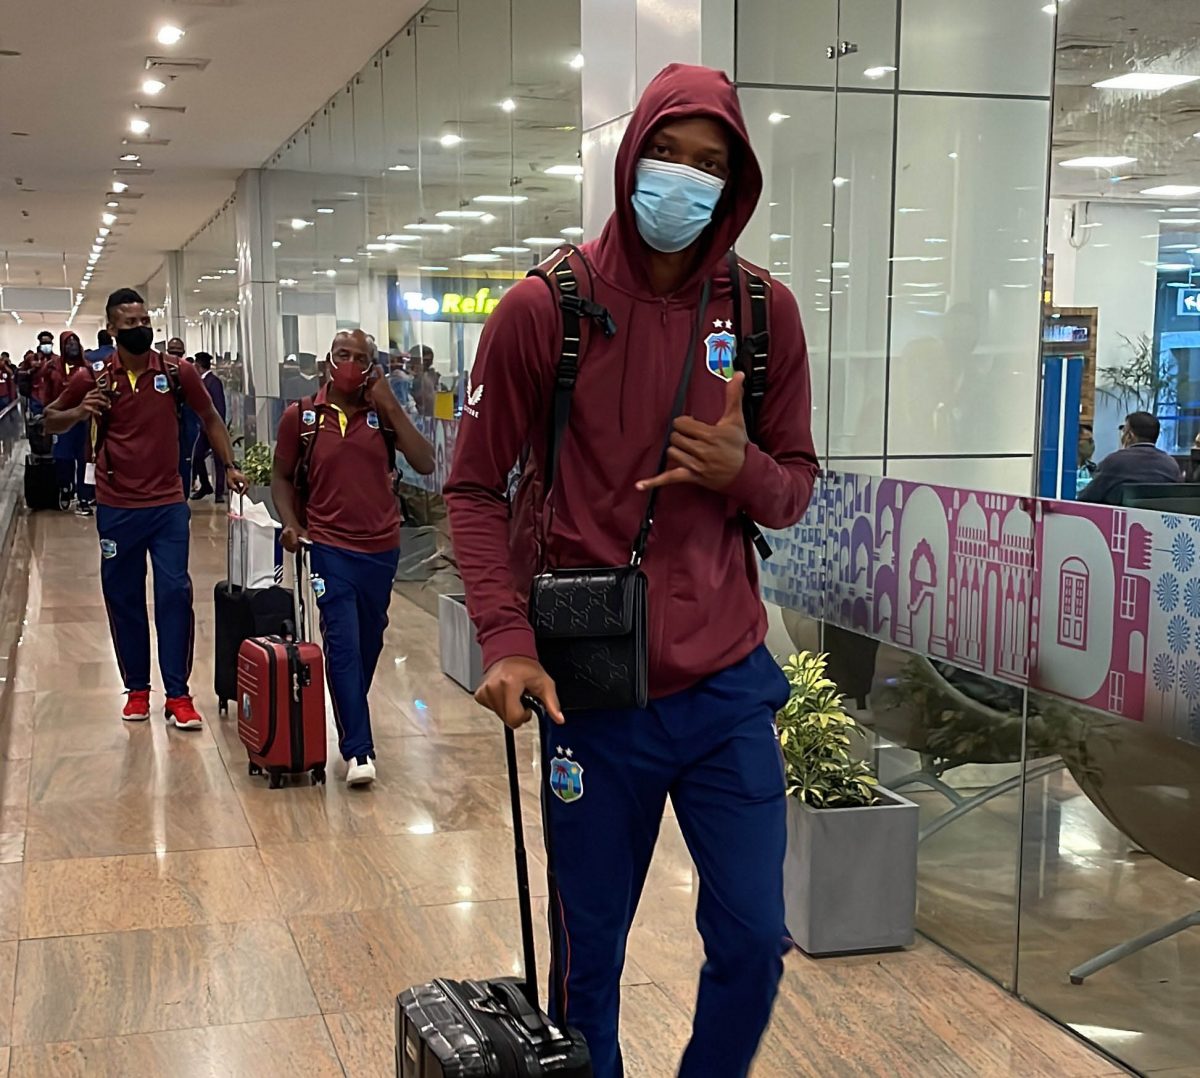 The West Indies players arrive in Ahmedabad, India ahead of their three-match ODI series